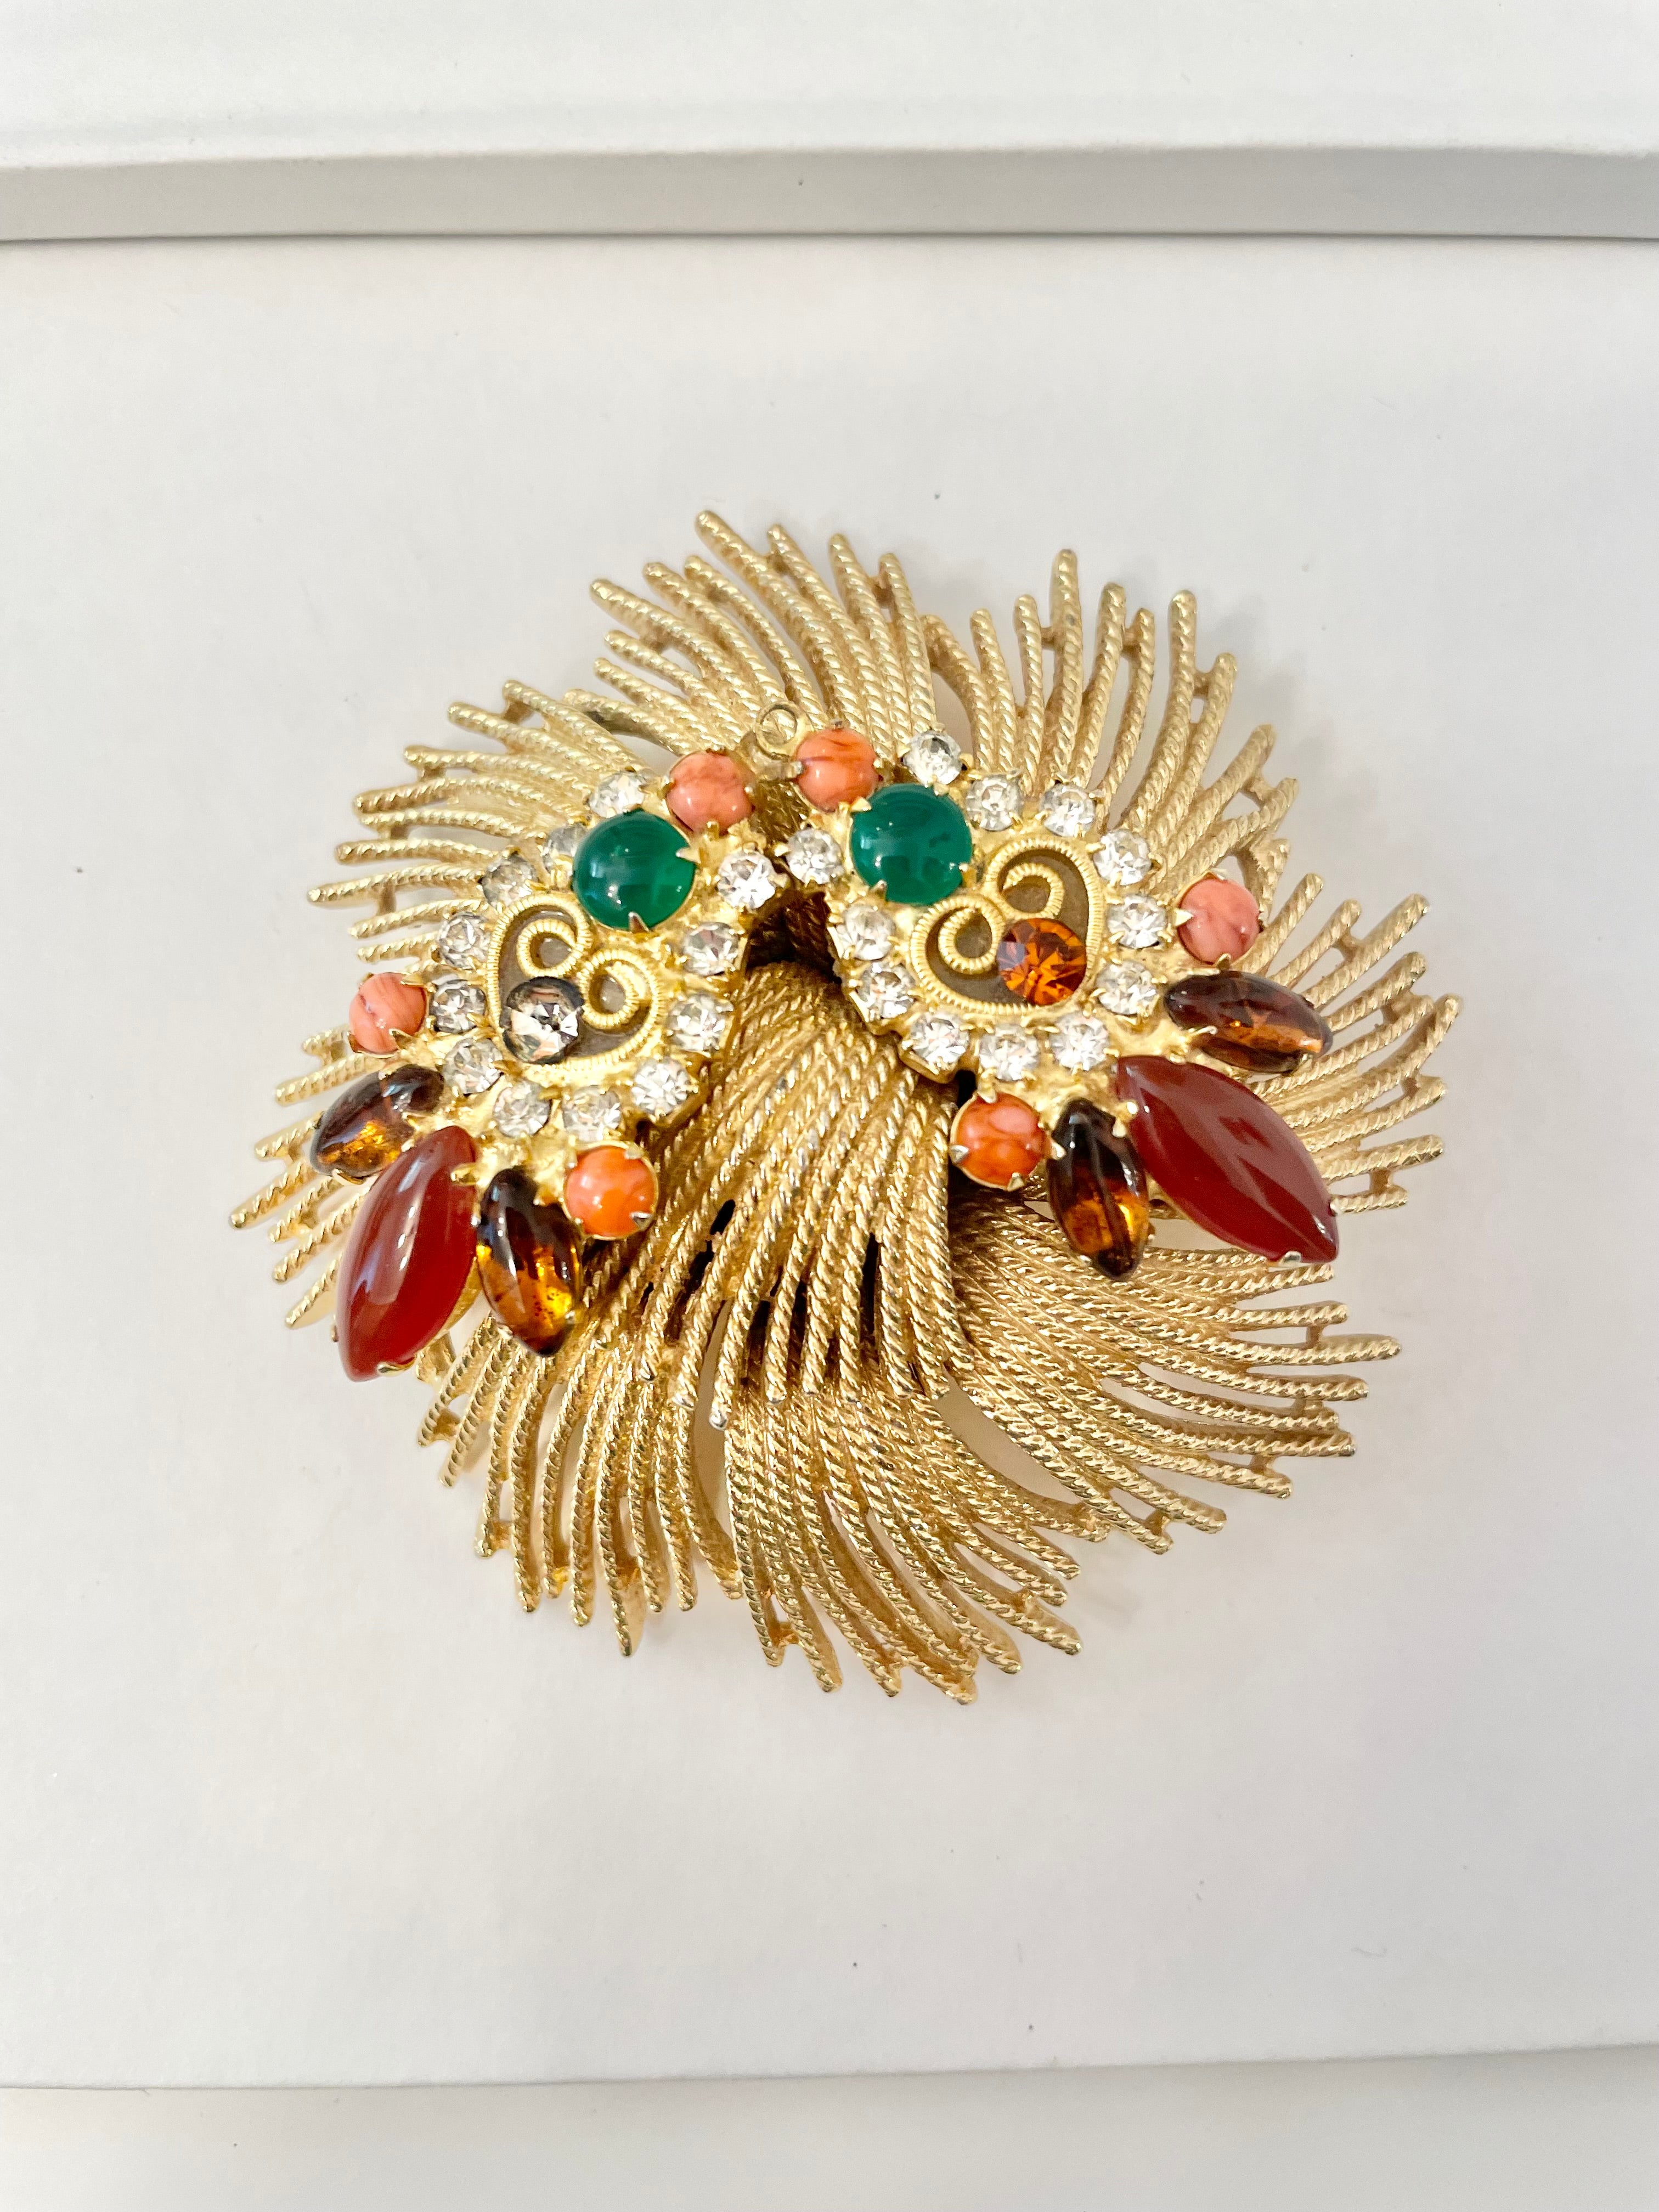 A beautiful rich gold brooch, adorned with the most exquisite color story, coral, green, and carnelian! so chic